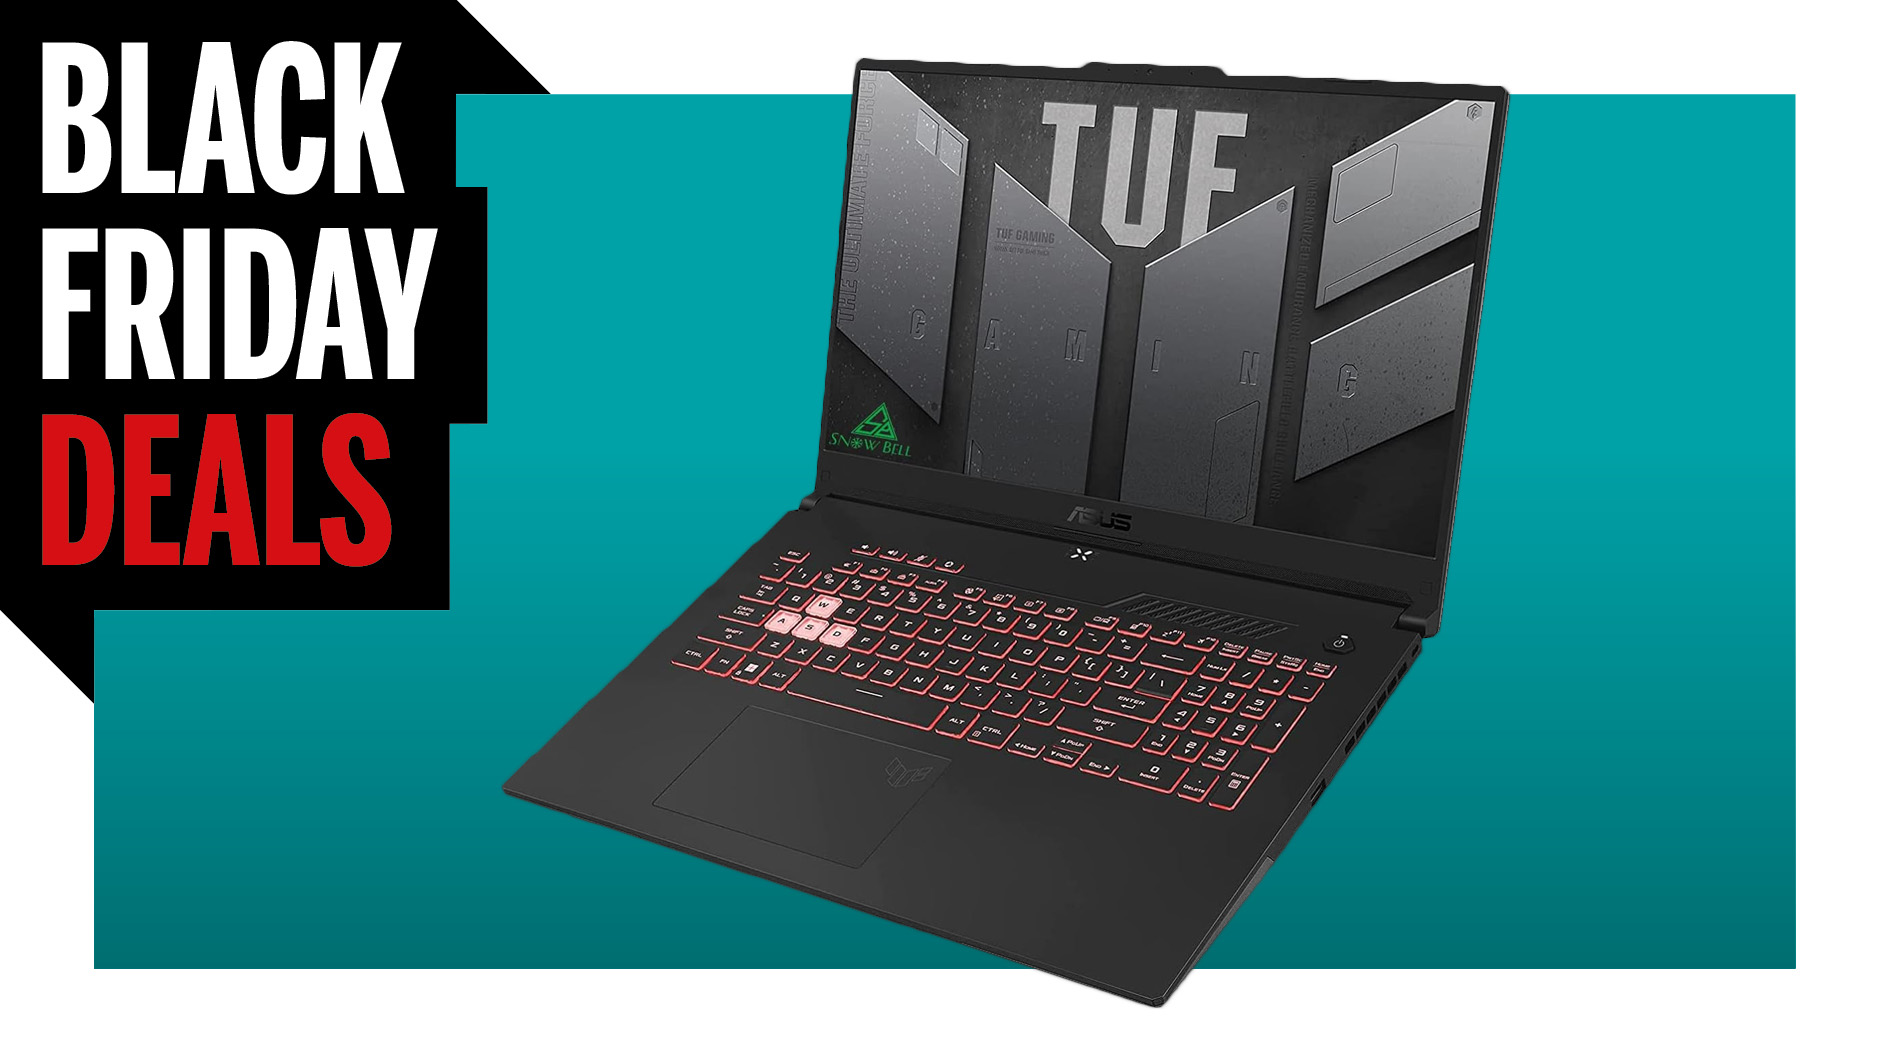  Finish your Black Friday search early with this 17-inch RTX 4070 Asus gaming laptop for $400 off 